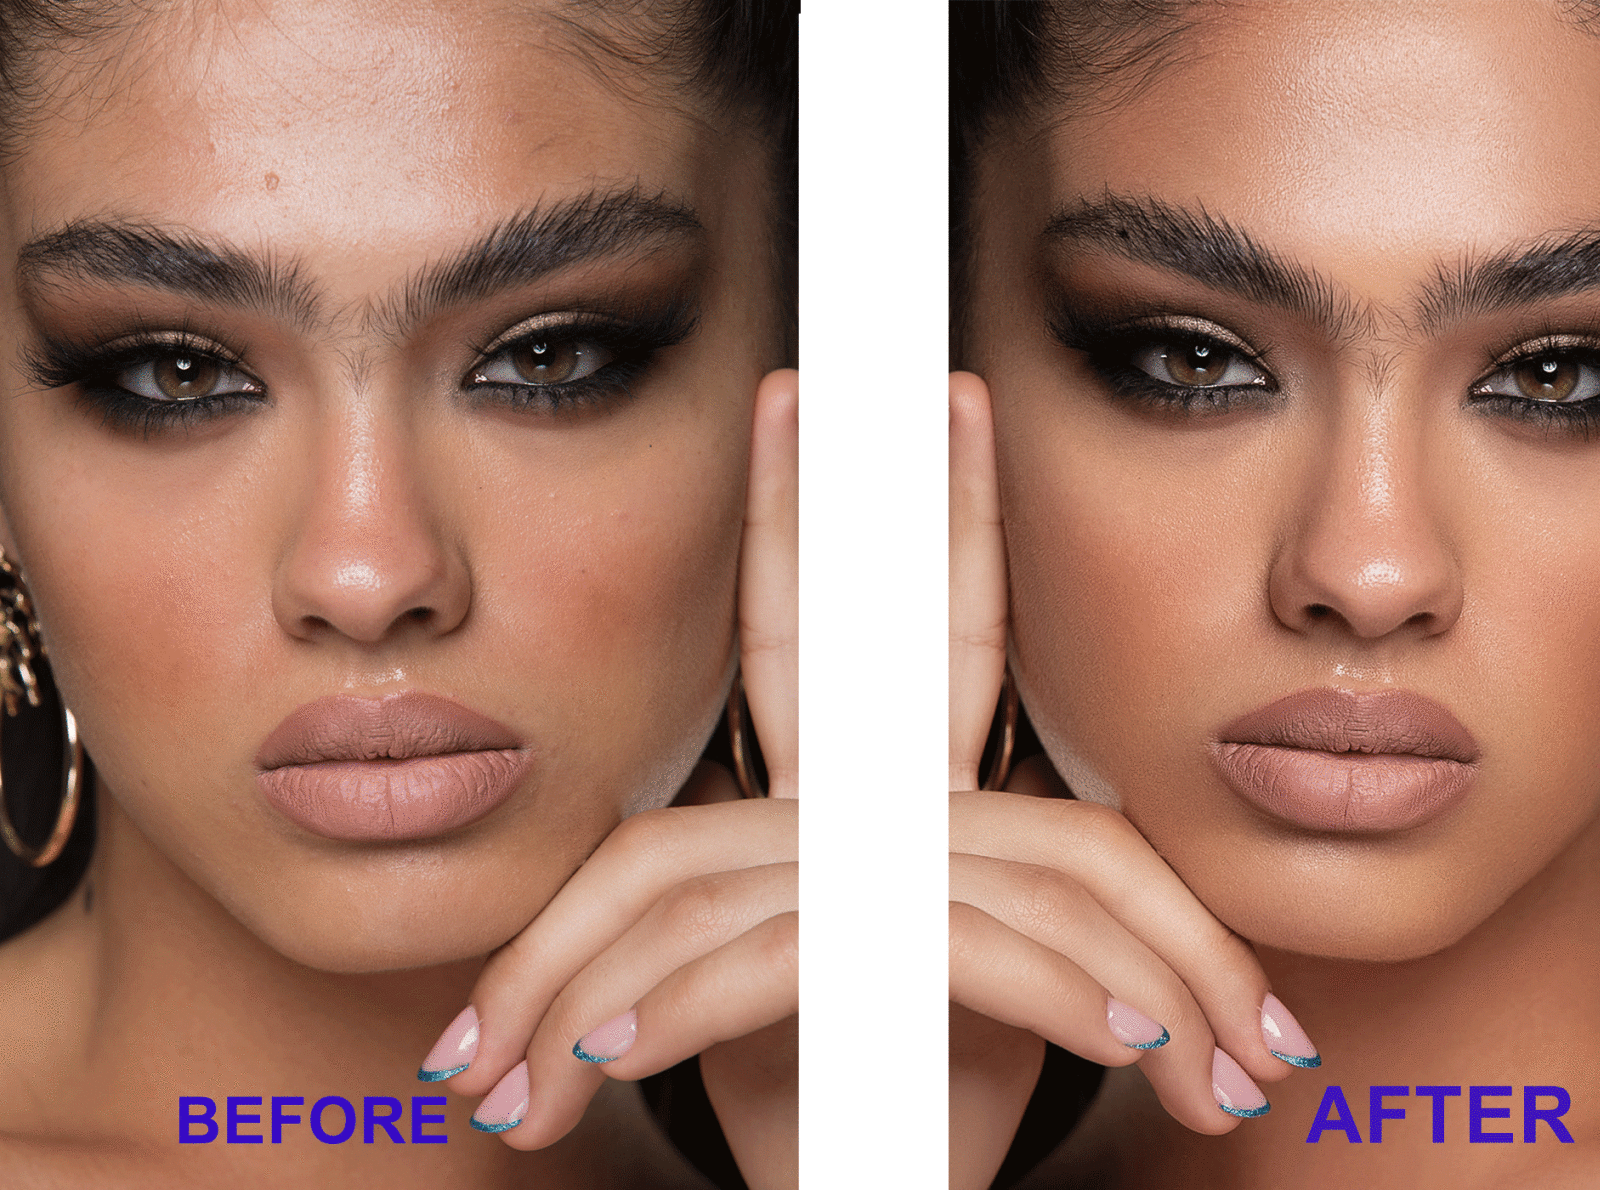 Retouching services professionally animation background removal branding branding concept clipping path clippingpath cropping design editing photographer photoshop product photo editing productdesign remove background retouching transparent web design